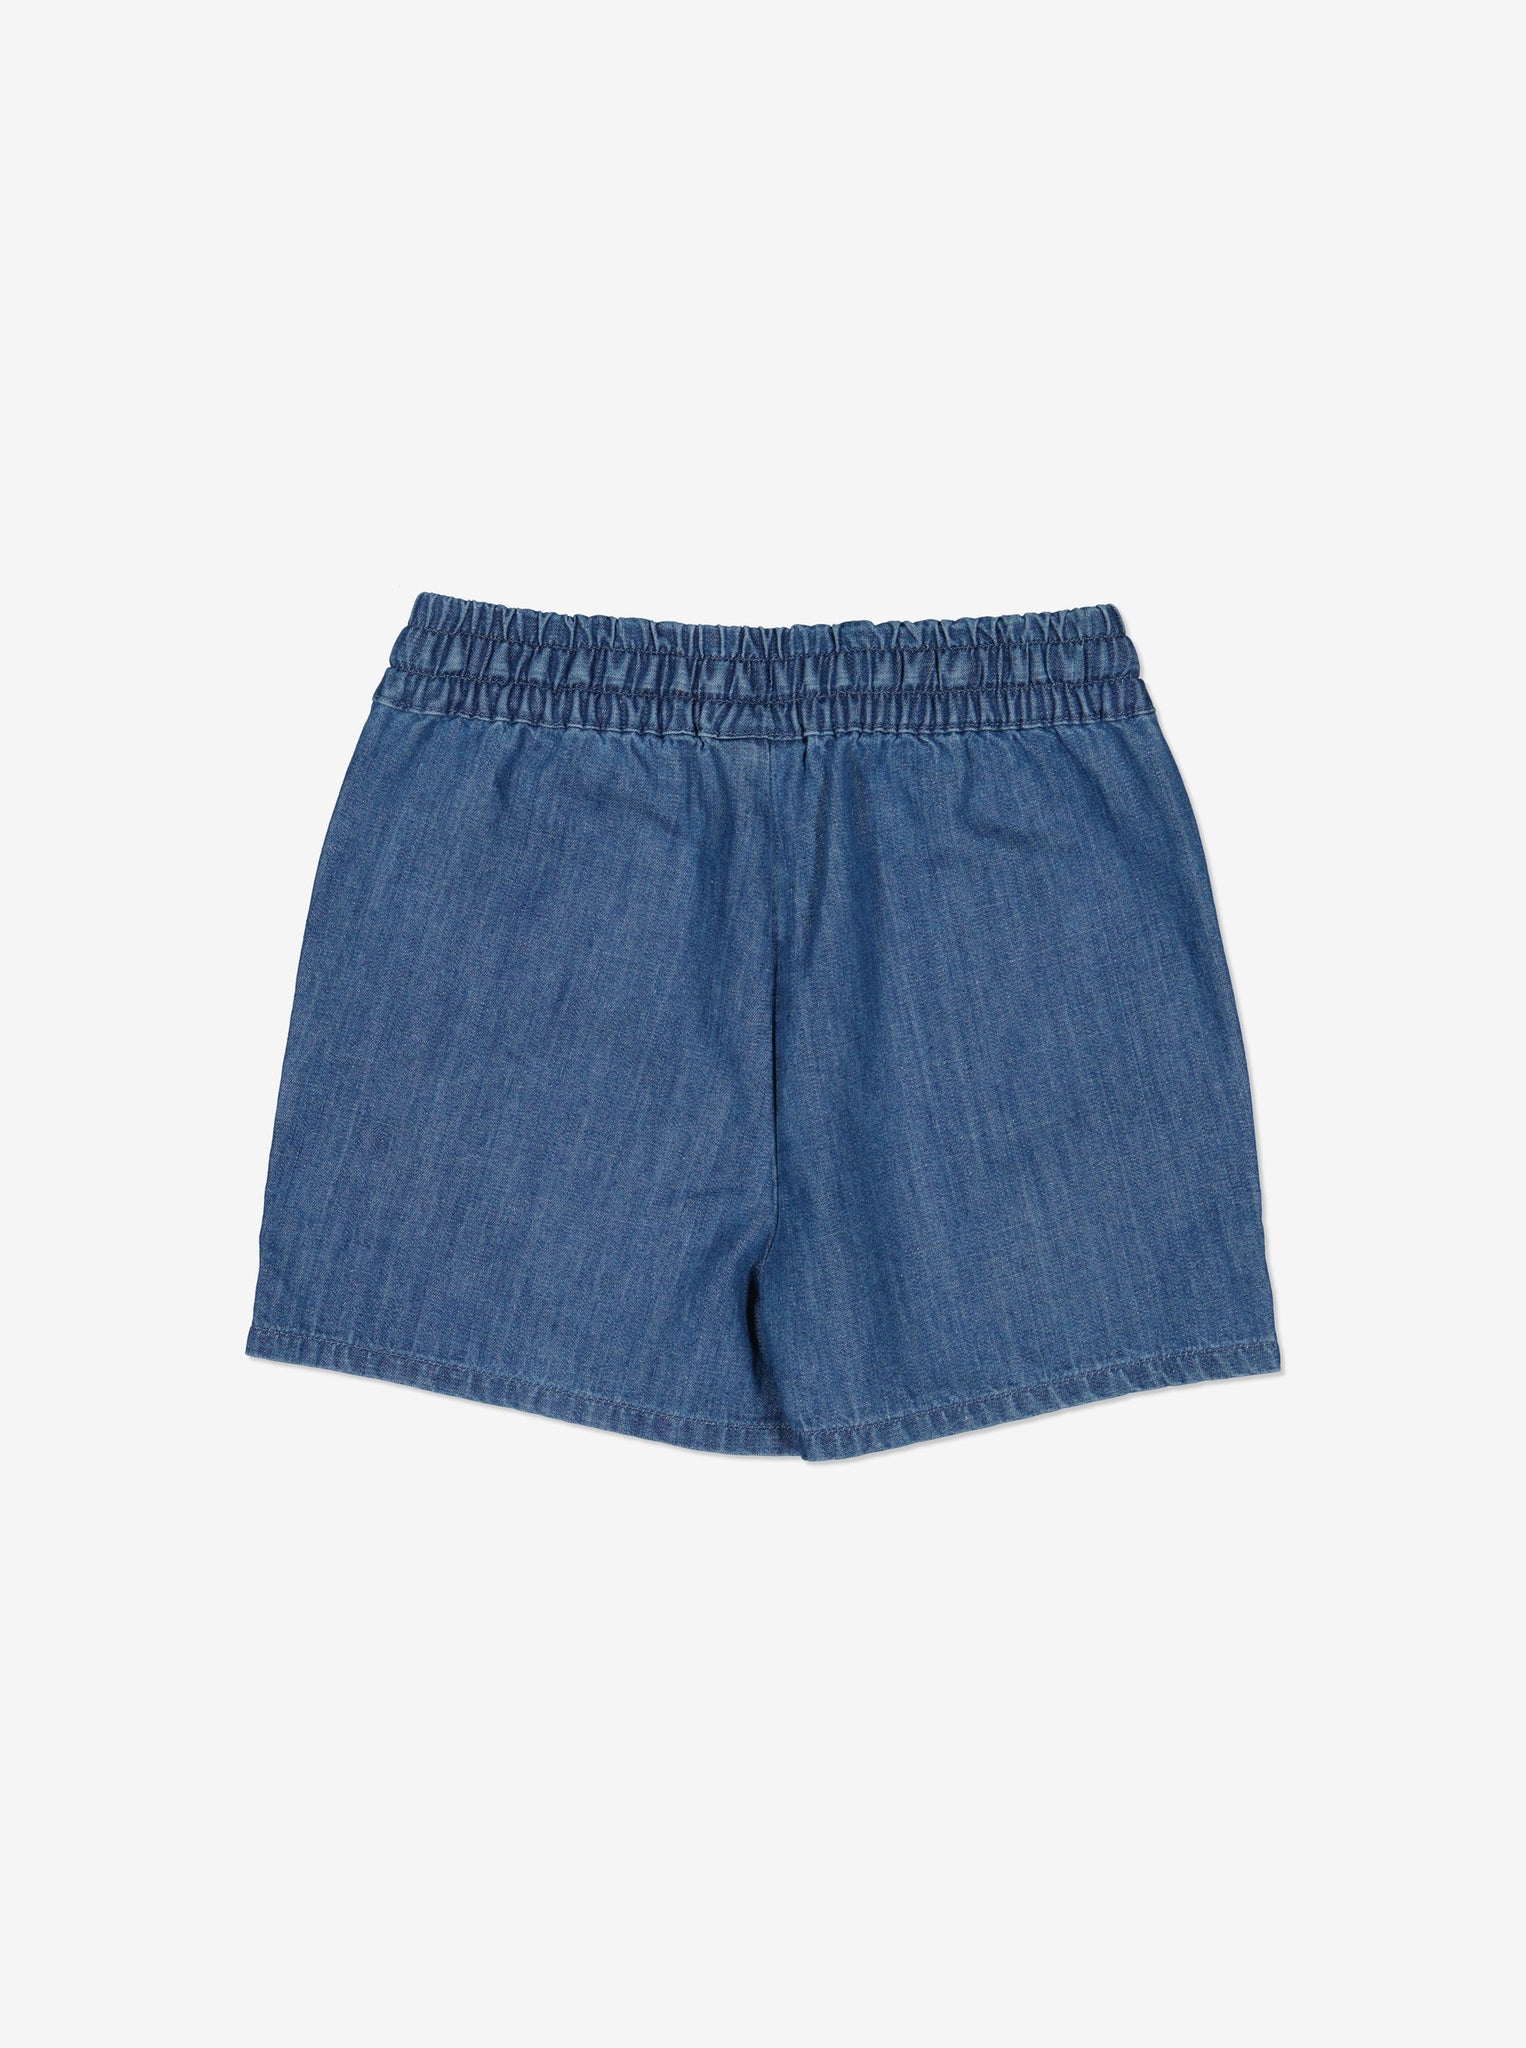 Quality Kids Denim Shorts from Polarn O. Pyret Kidswear. Made from ethically sourced materials.